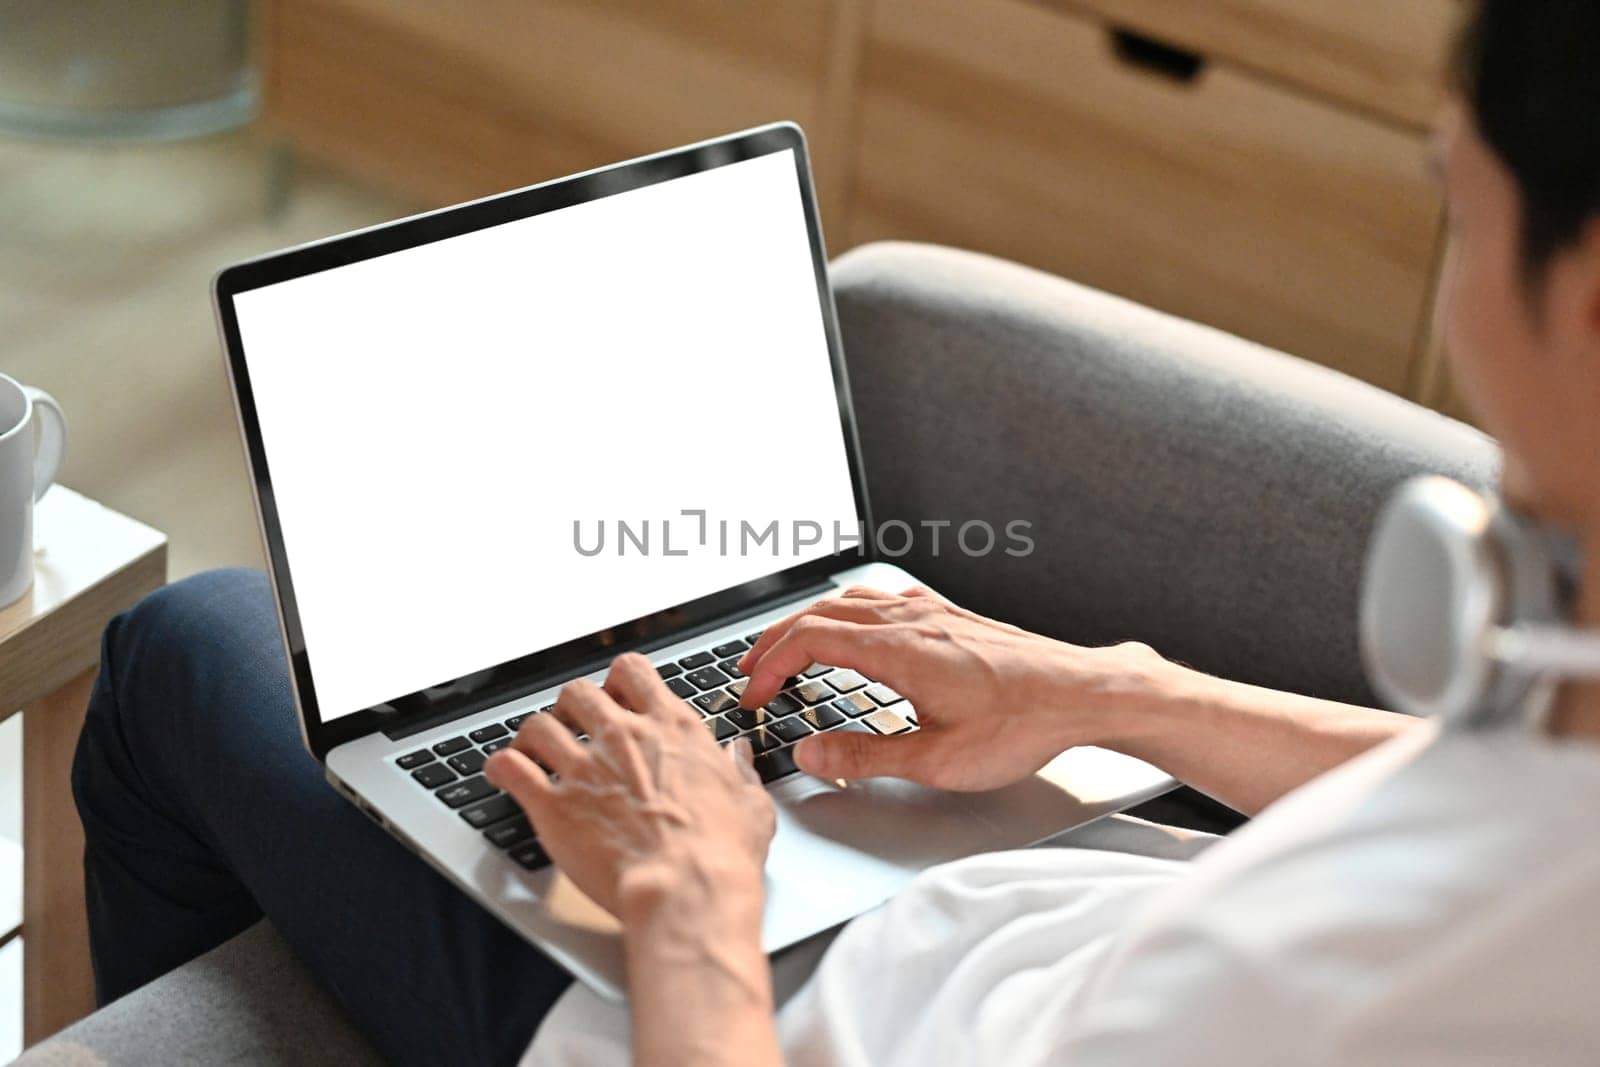 Man relaxing on couch working remotely, surfing internet on laptop. Blank screen for your advertising text message.